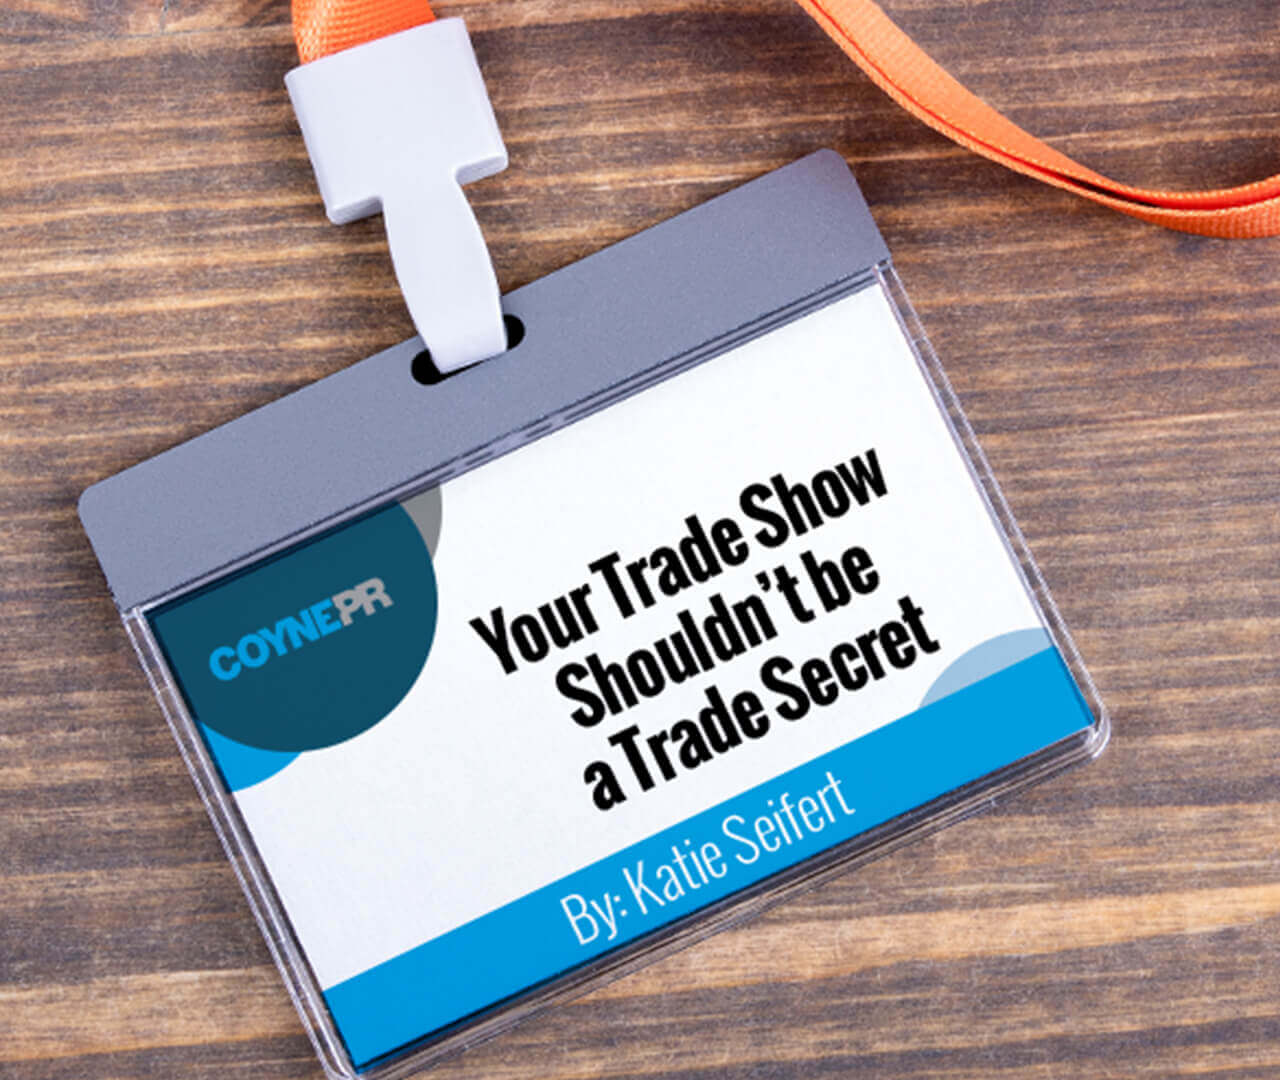 Your Trade Show Shouldn’t be a Trade Secret